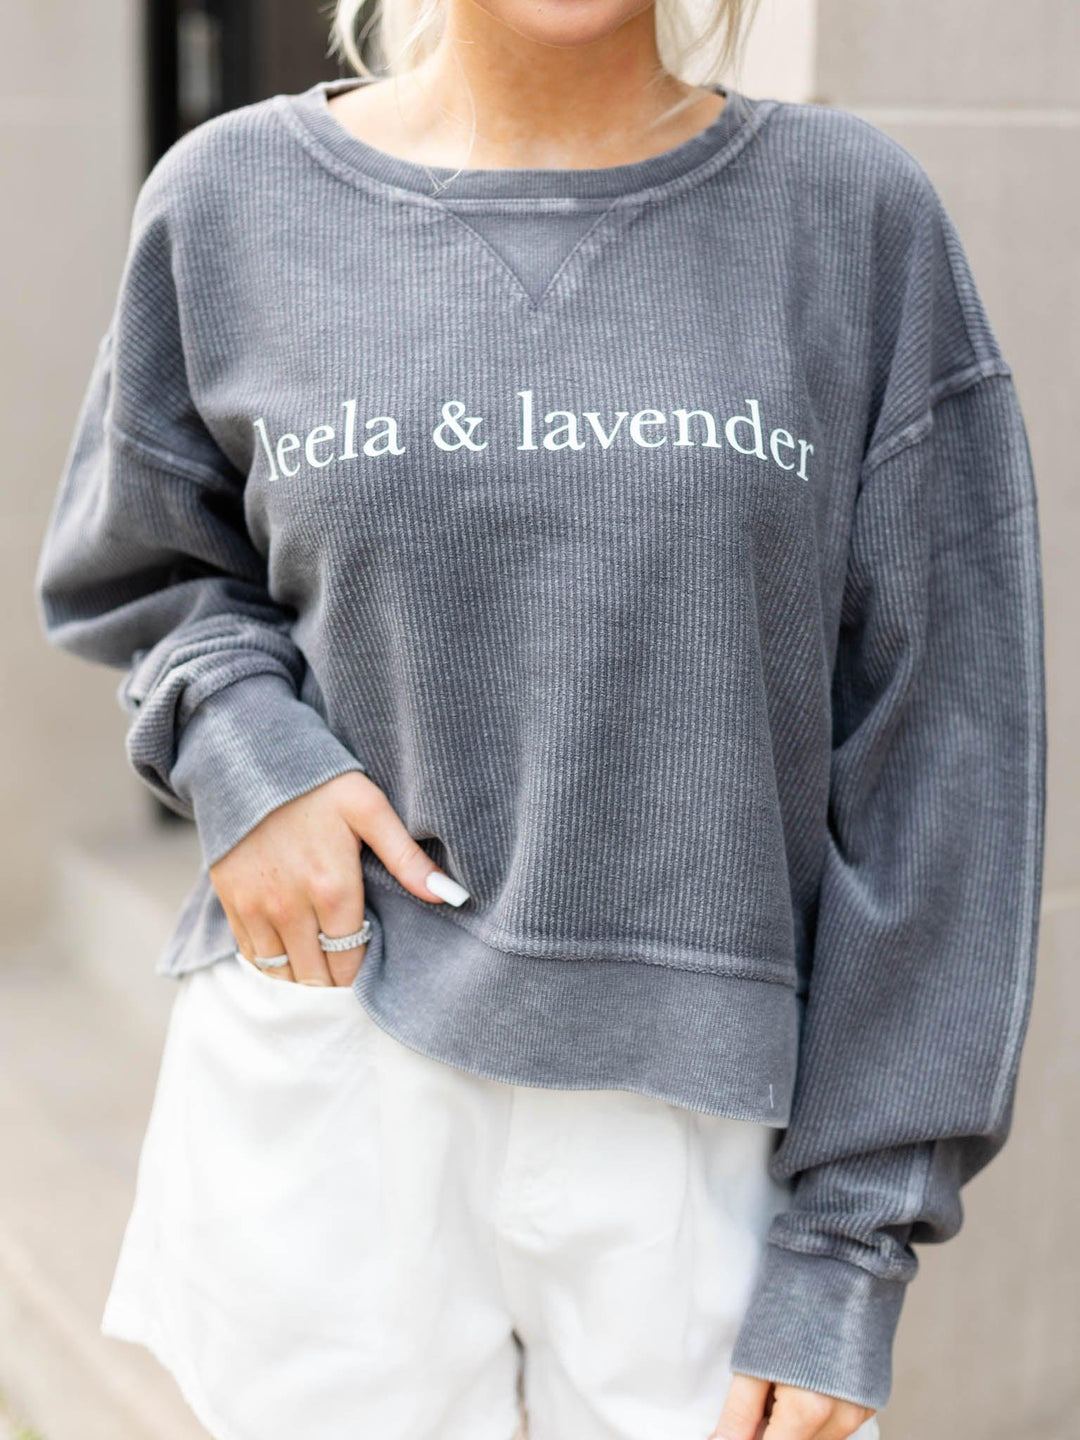 Chicka-D-leela & lavender Corded Boxy Pullover - Leela and Lavender